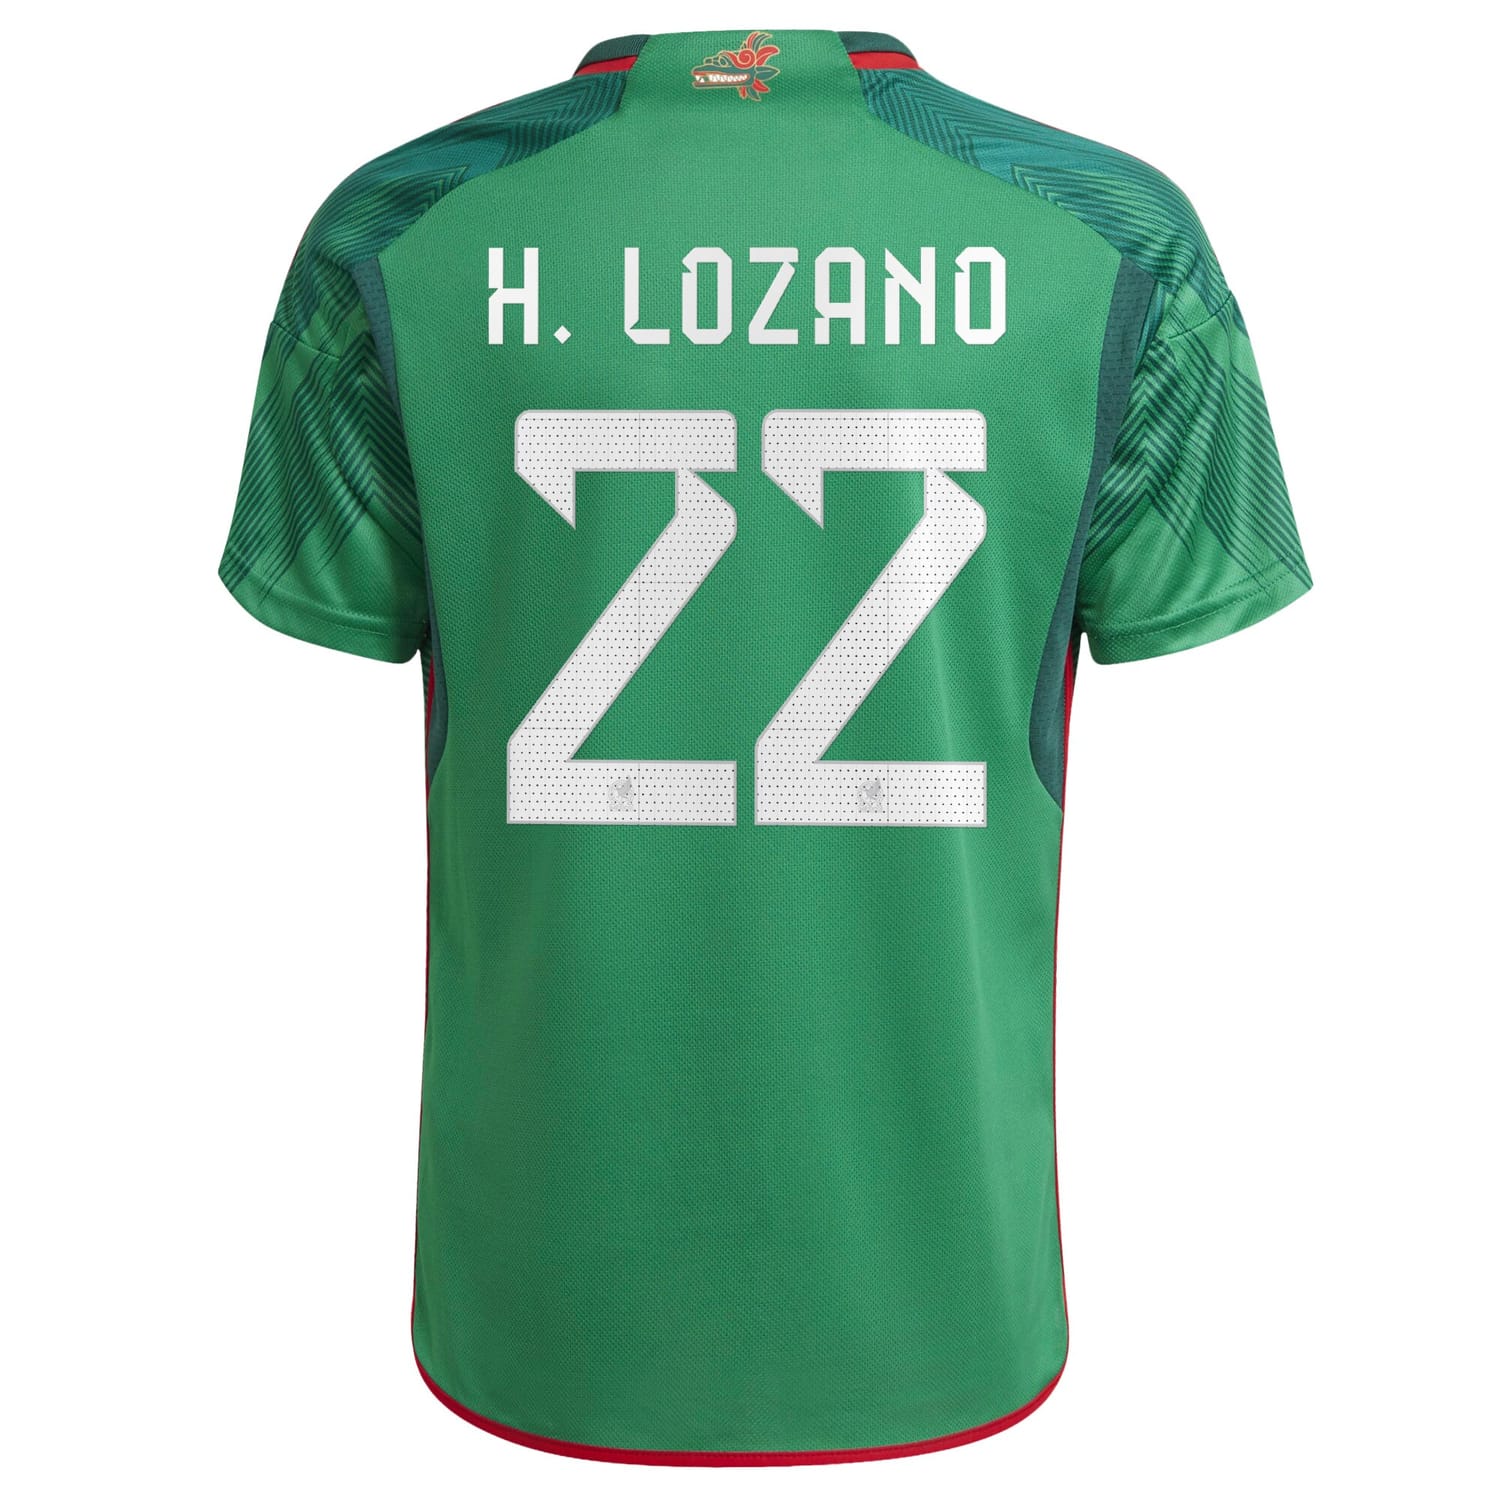 Mexico National Team Home Jersey Shirt Green 2022-23 player Hirving Lozano printing for Men